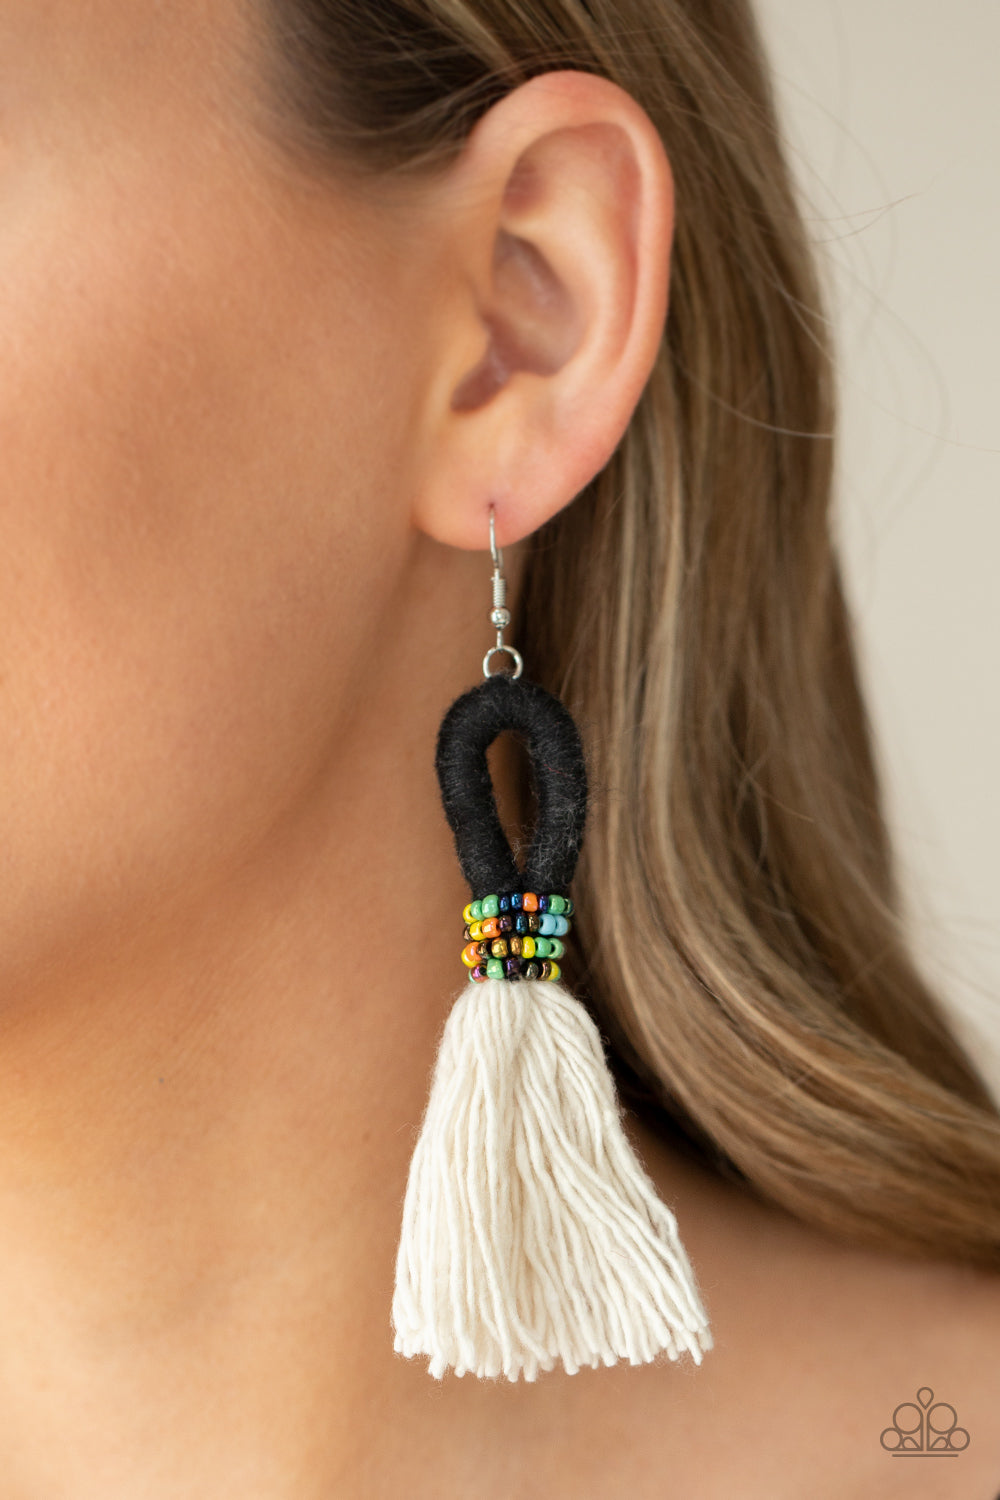 The Dustup Black Earring - Paparazzi Accessories  A tassel of soft white cotton fans out under rows of brightly colored seed beads. Anchored by a loop of jet black floss, the eye-catching style swings from the ear for a show-stopping statement. Earring attaches to a standard fishhook fitting.  All Paparazzi Accessories are lead free and nickel free!  Sold as one pair of earrings.